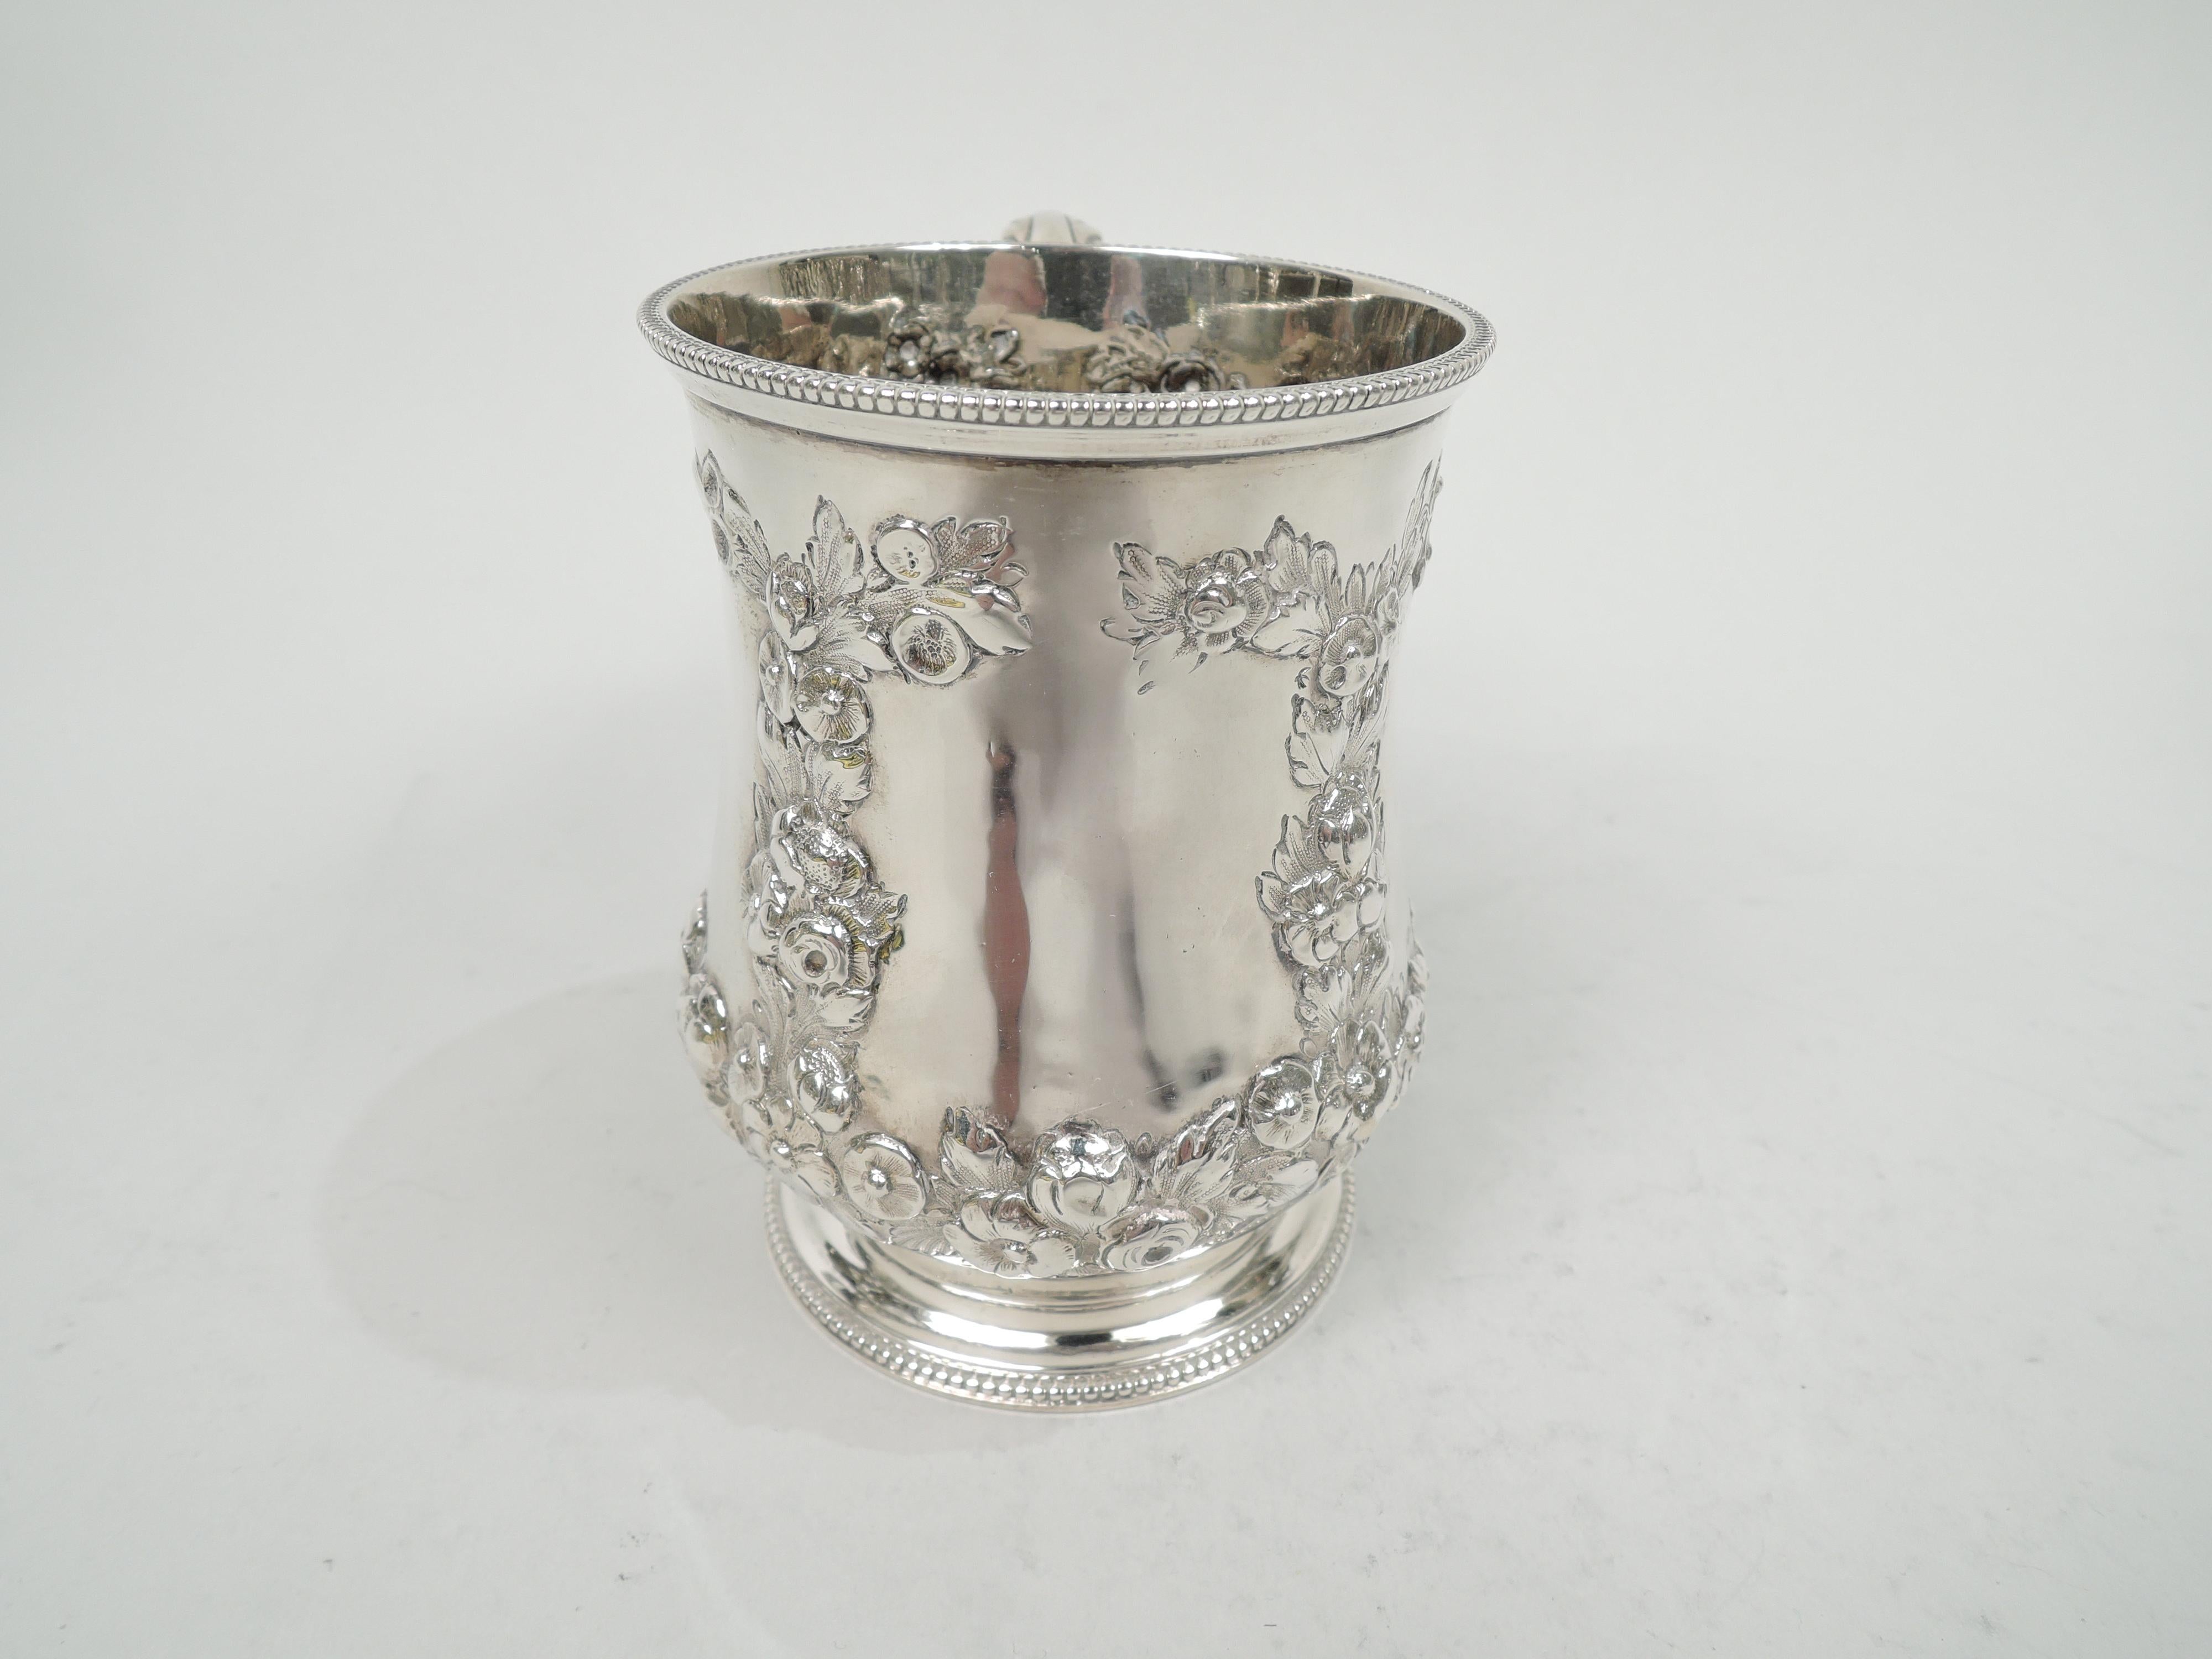 Victorian sterling silver baby cup. Made by Daniel & Charles Houle in London in 1870. Baluster bowl with leaf-capped double-scroll handle and raised foot. Garlands forming four rectilinear frames (vacant). Beaded rims. Weight: 6 troy ounces.